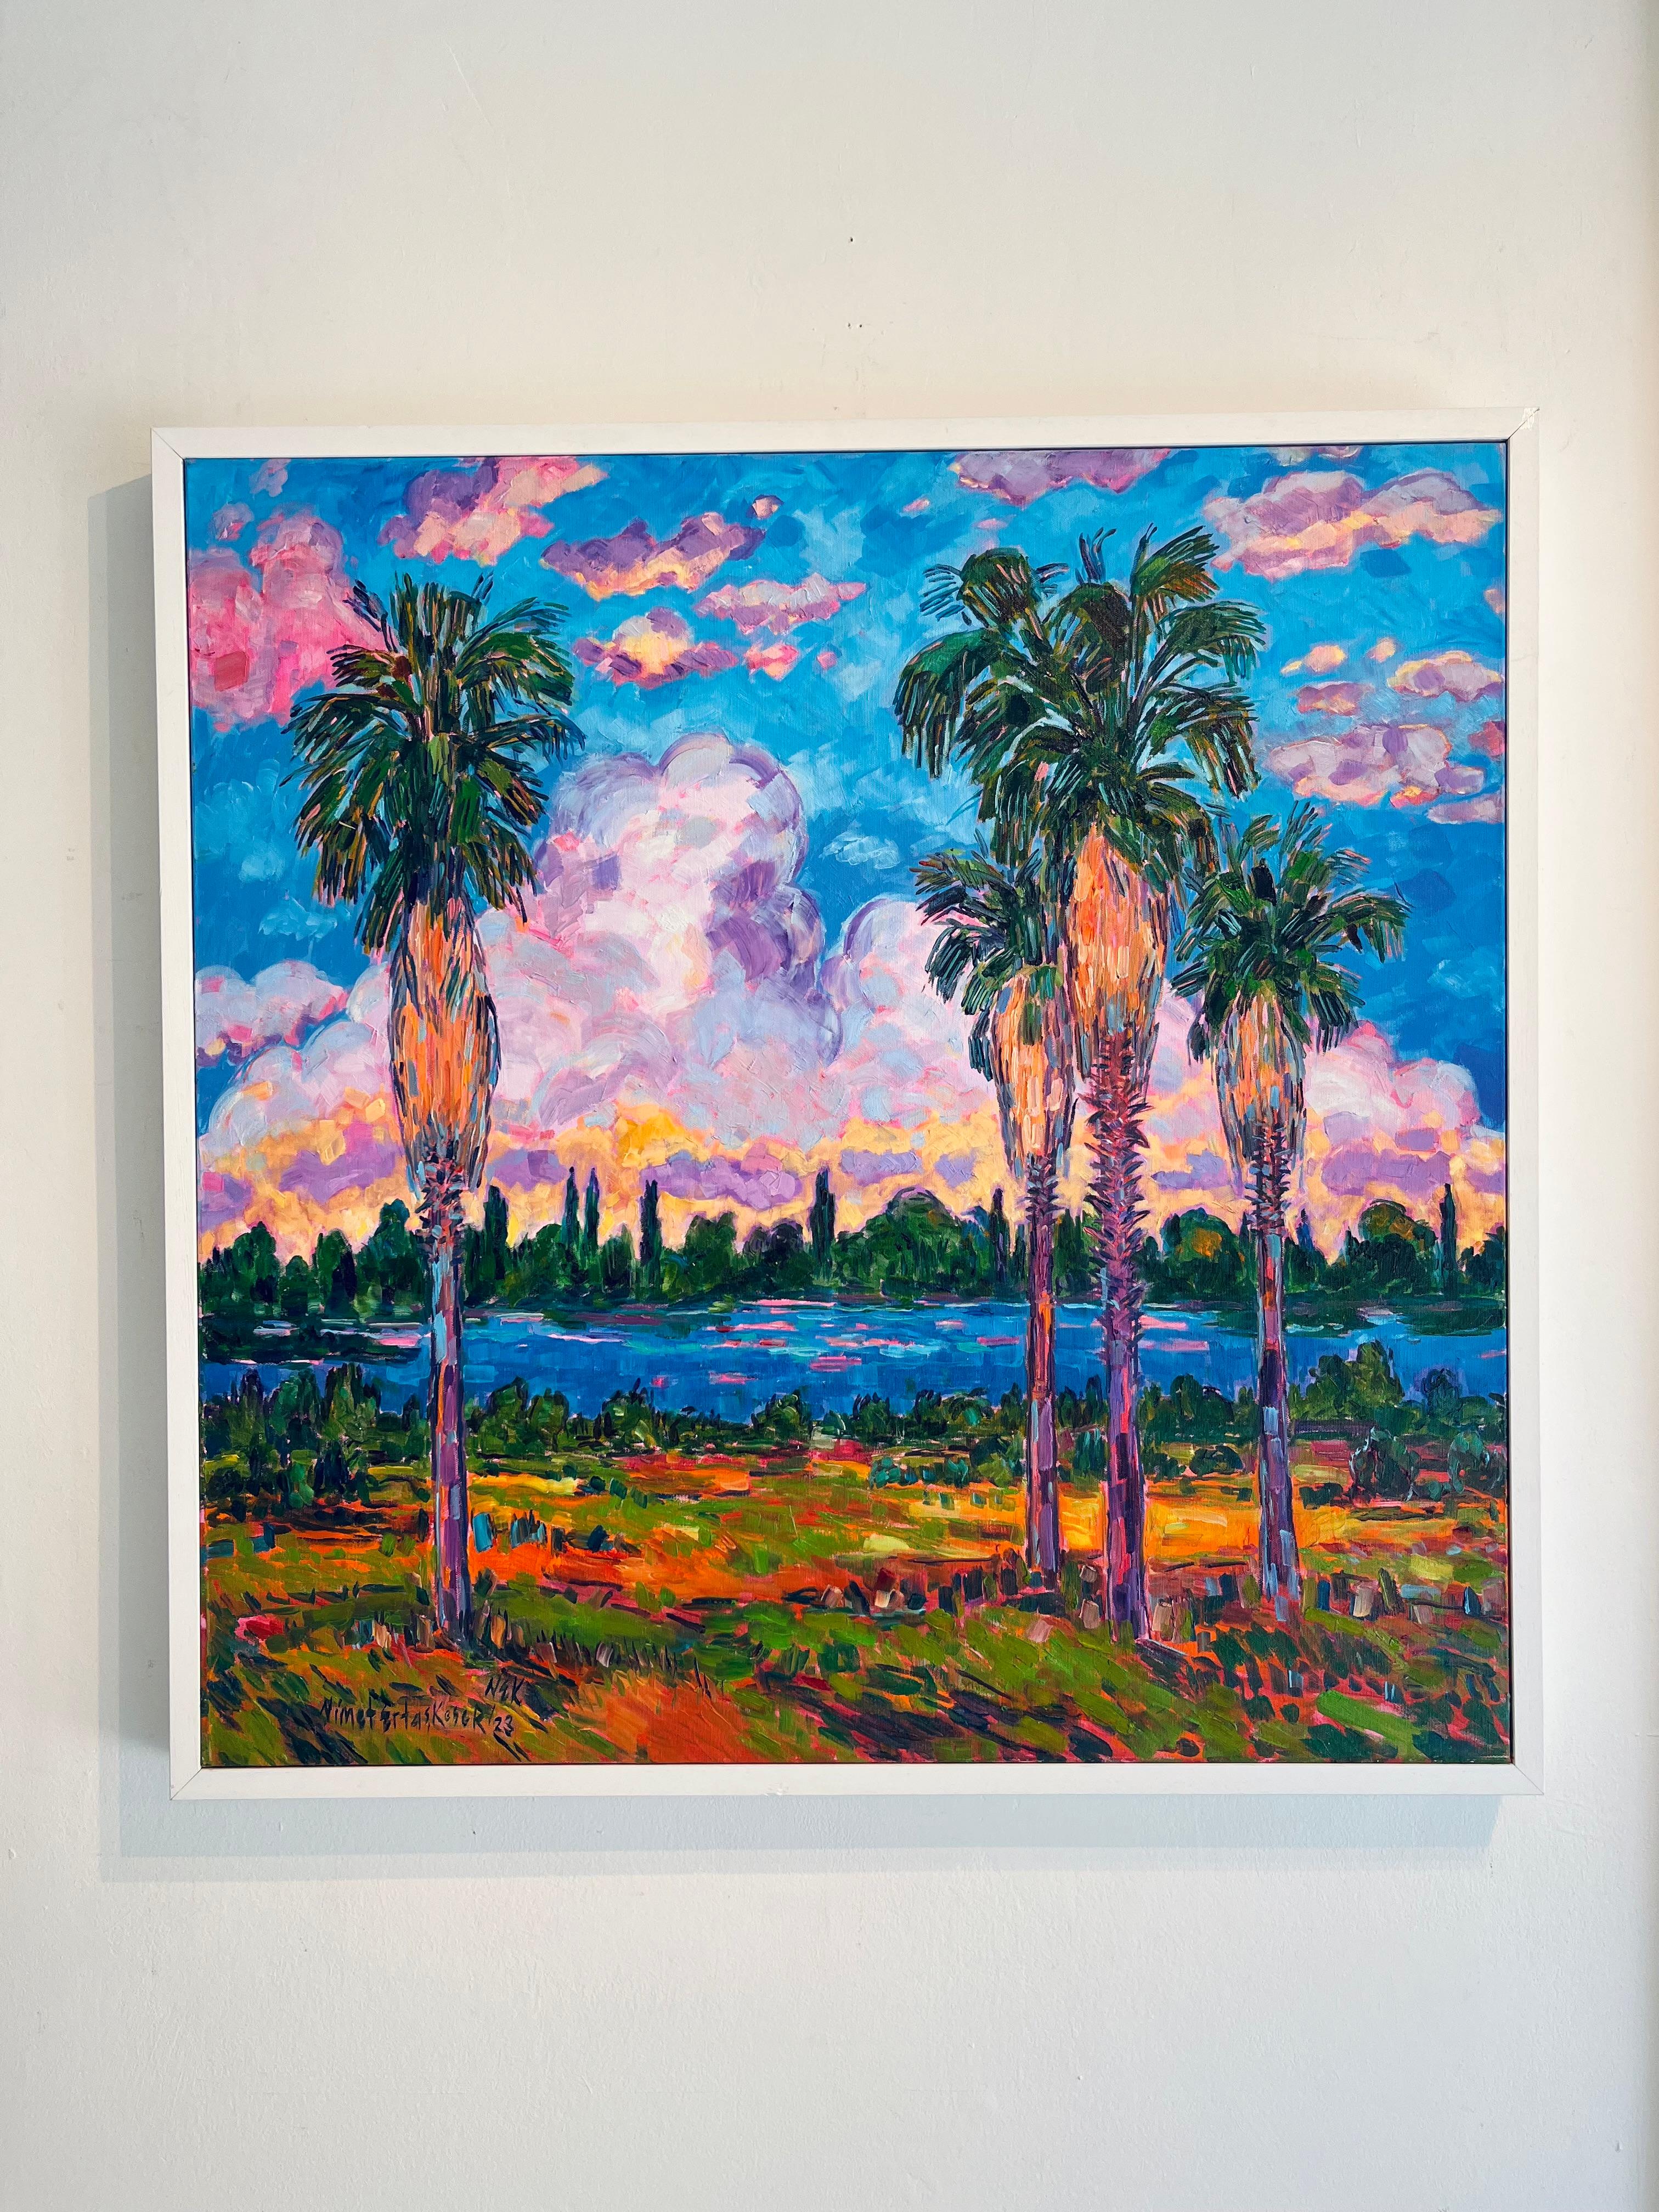 Palm trees by the River side & Sunset-original impressionism landscape painting - Painting by Nimet Keser